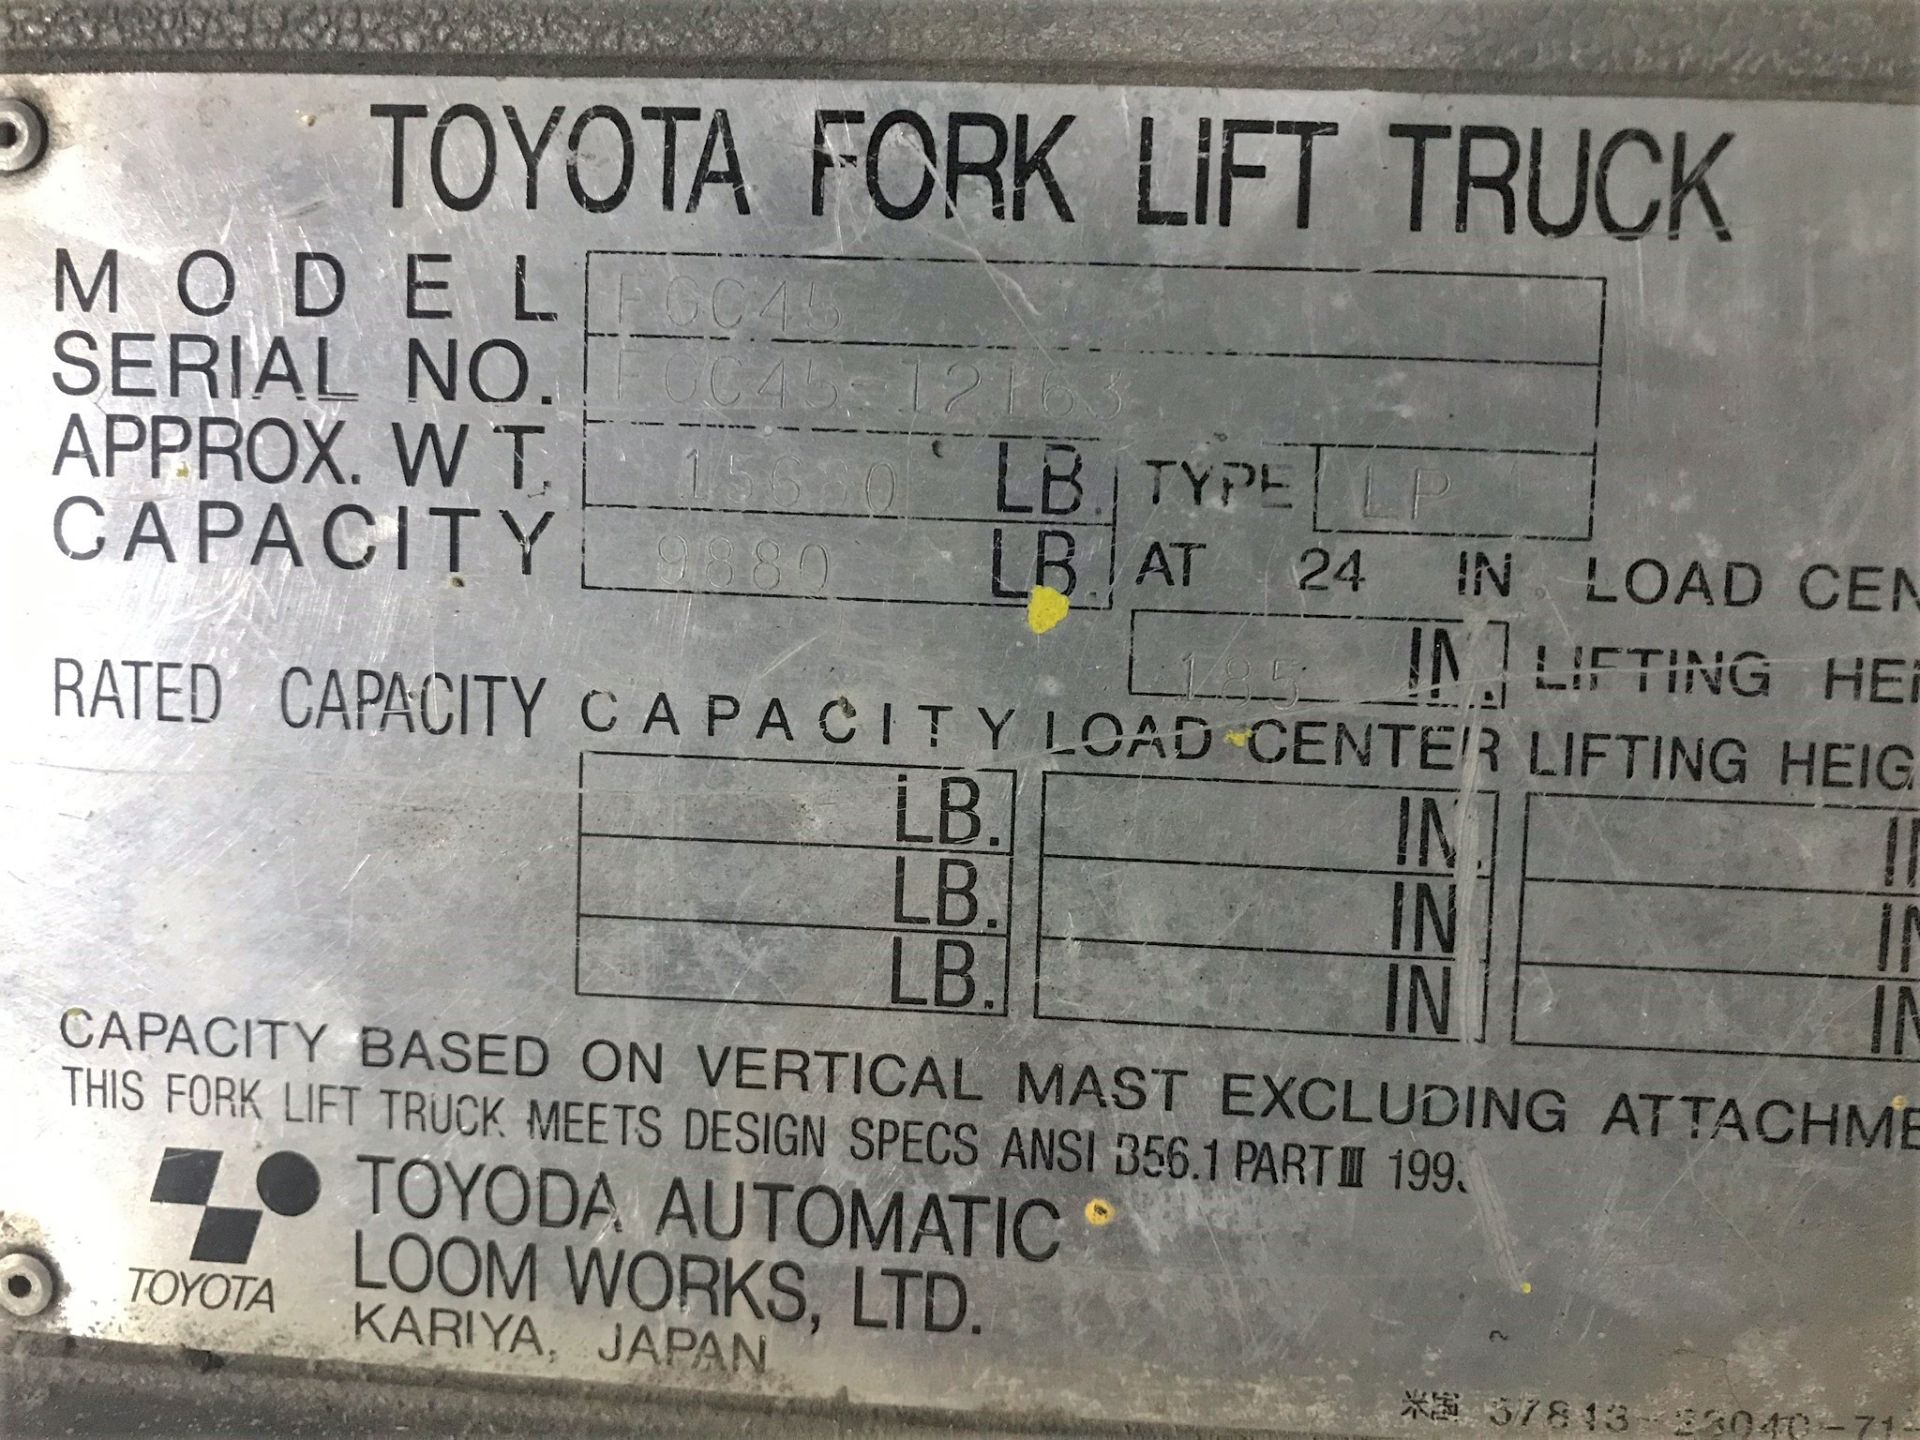 TOYOTA MDL. FGC45 9880# CAPACITY FORKLIFT TRUCK, 3-STAGE MAST, 185" REACH, SOLID TIRES, S/N: FCC45- - Image 3 of 3